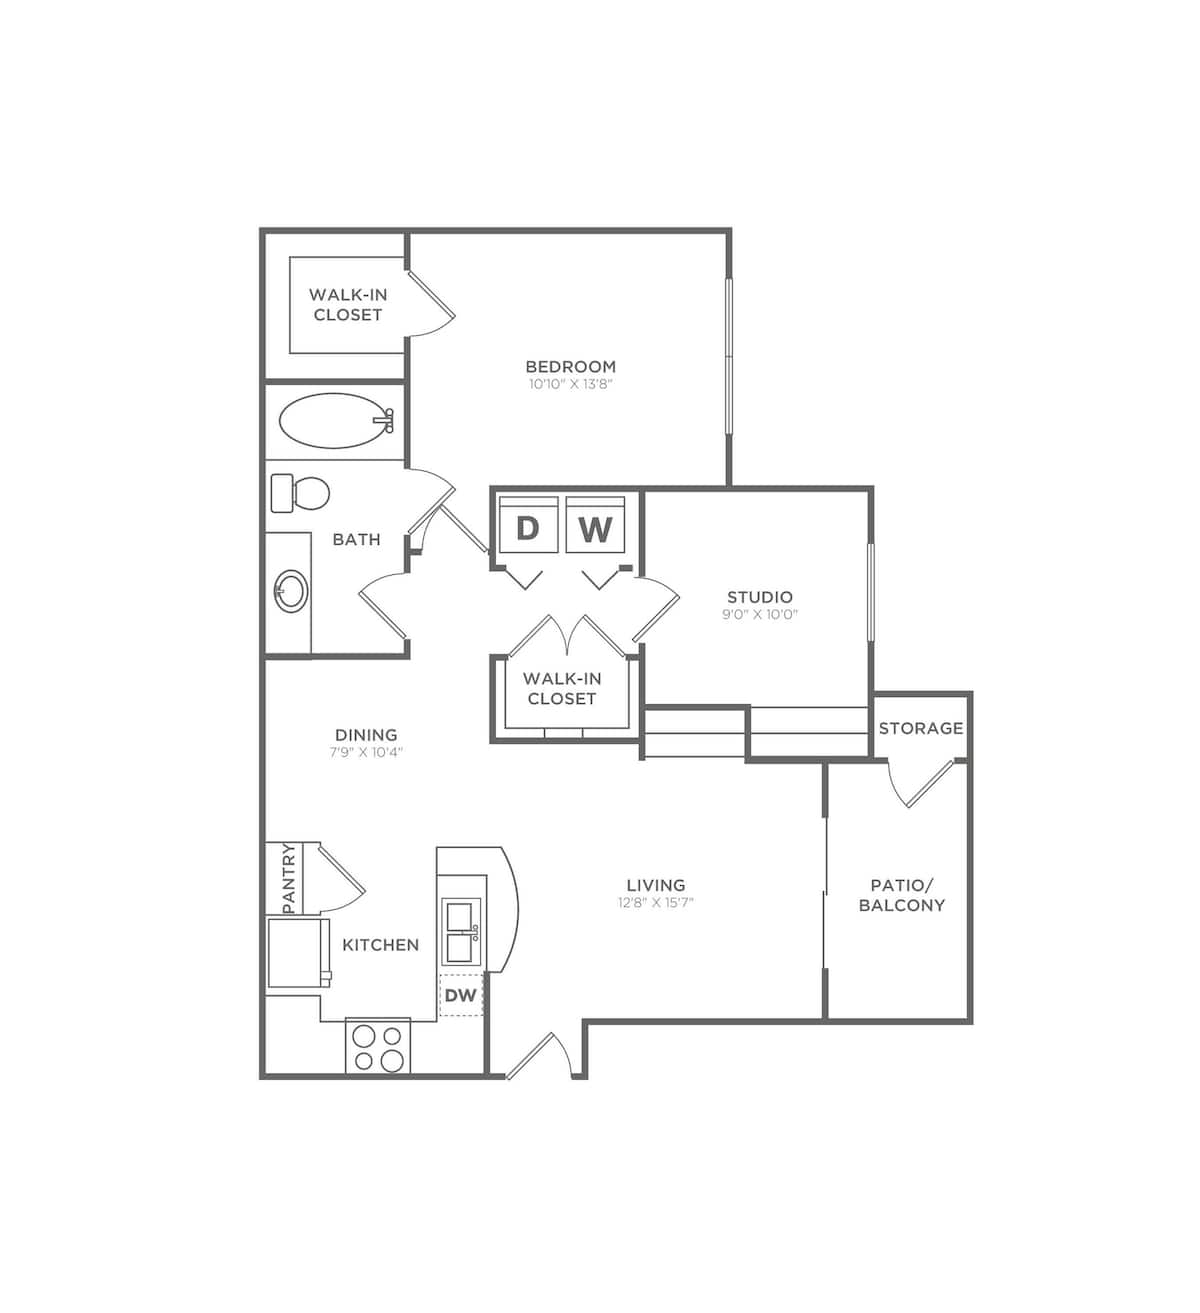 Floorplan diagram for A2-Tailored, showing 1 bedroom